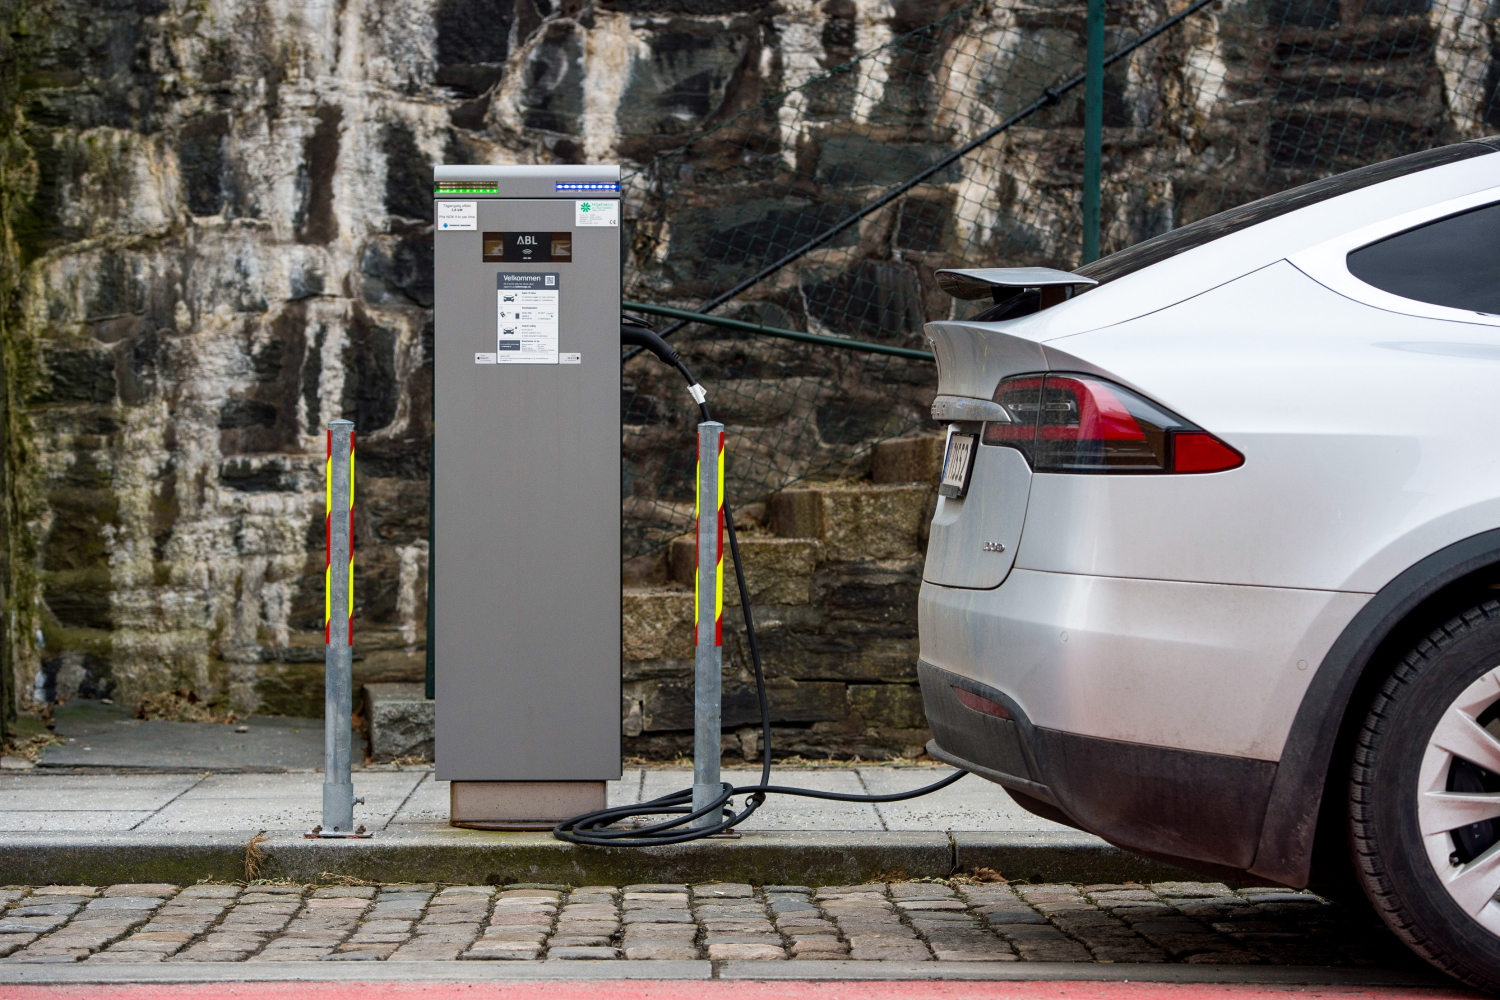 A Tesla is plugged in to an electric vehicle charger in Stavanger, Norway